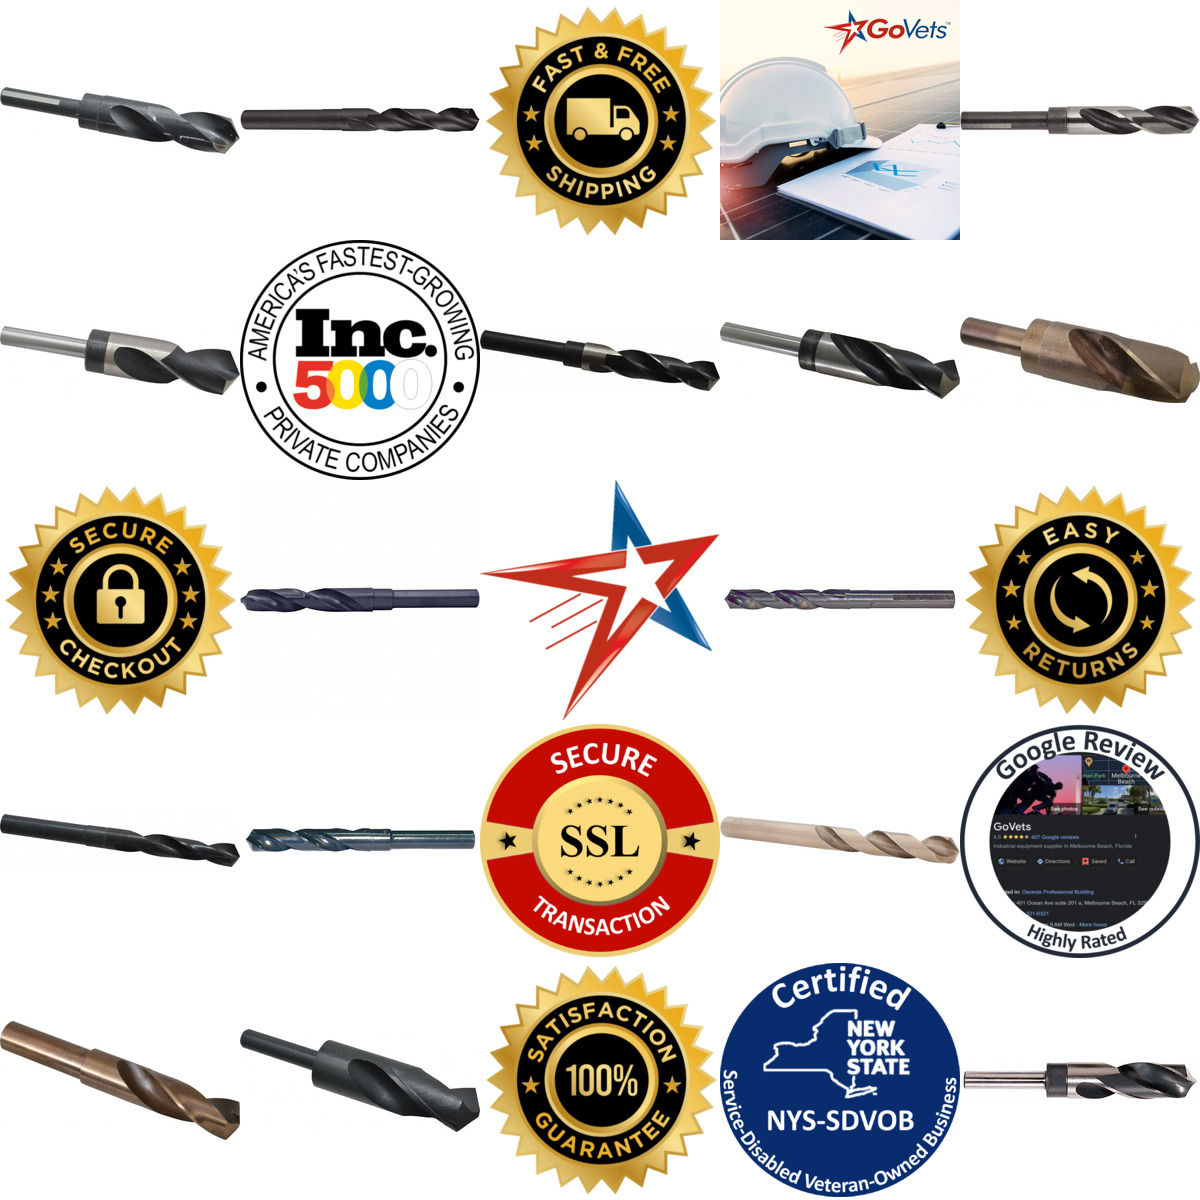 A selection of Silver and Deming and Reduced Shank Drill Bits products on GoVets